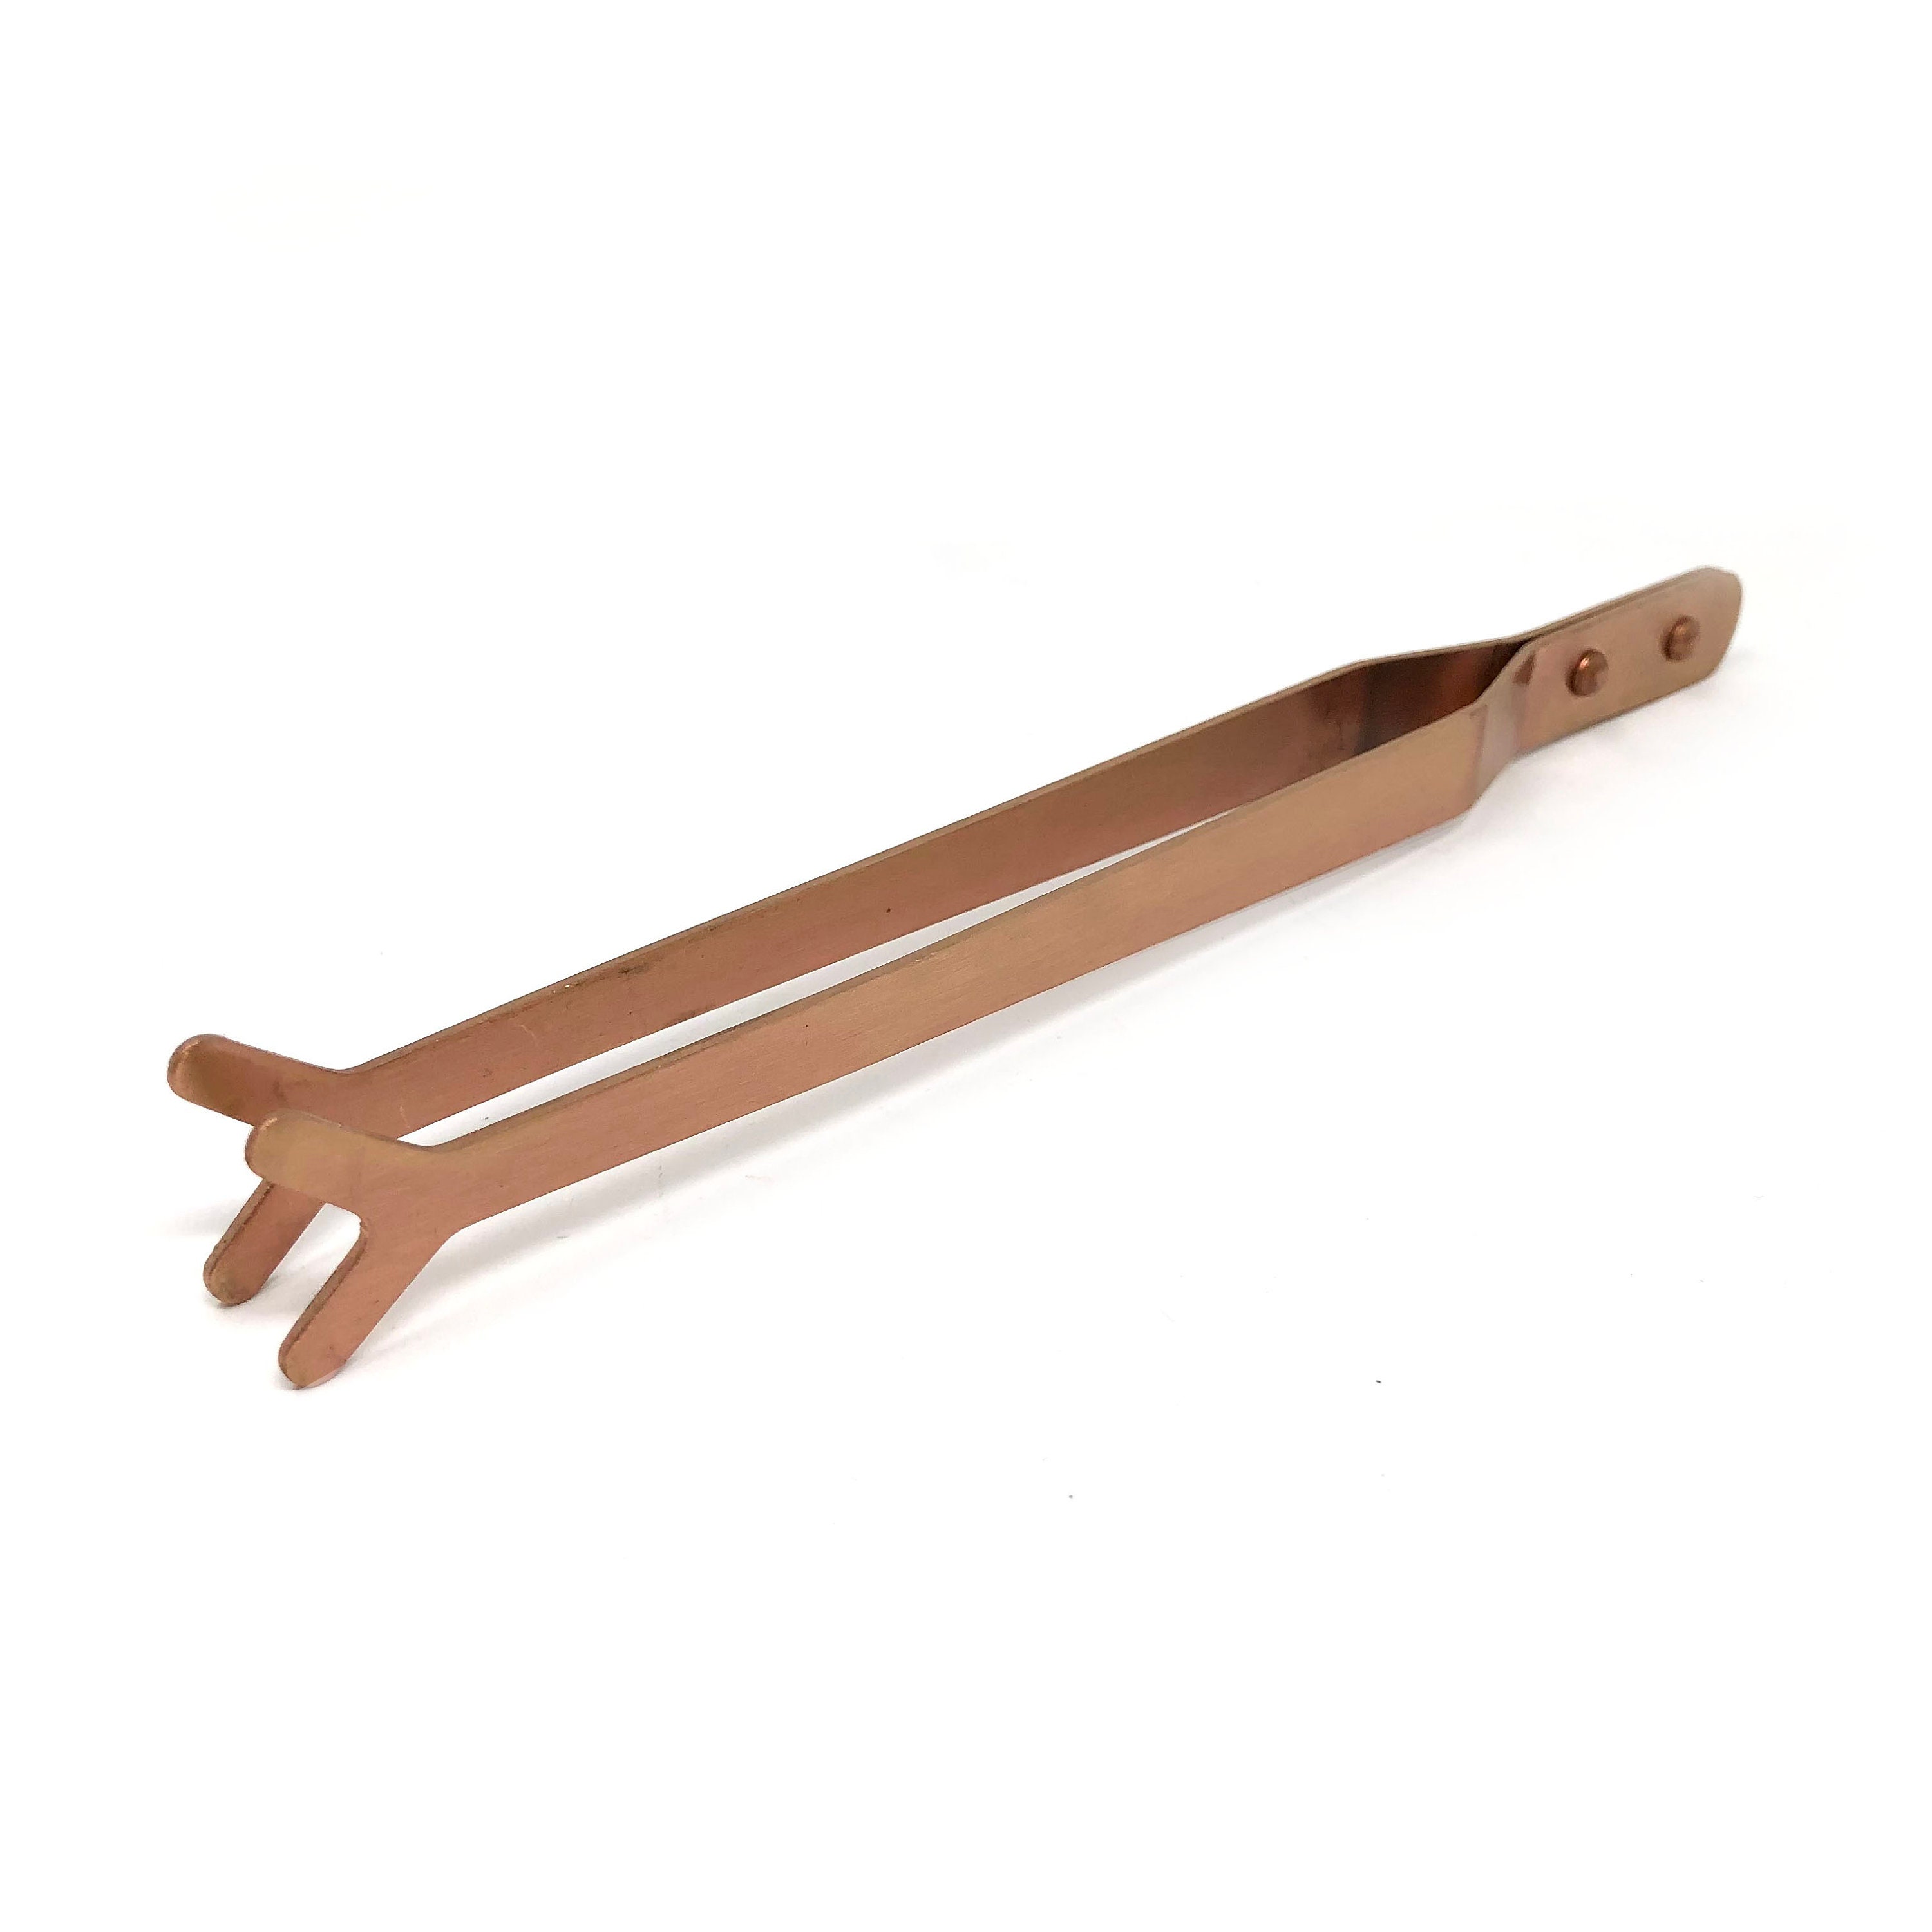 Wood Feeding Tongs Extra Long (11) - For Feeding Live Fish, Reptiles &  More!